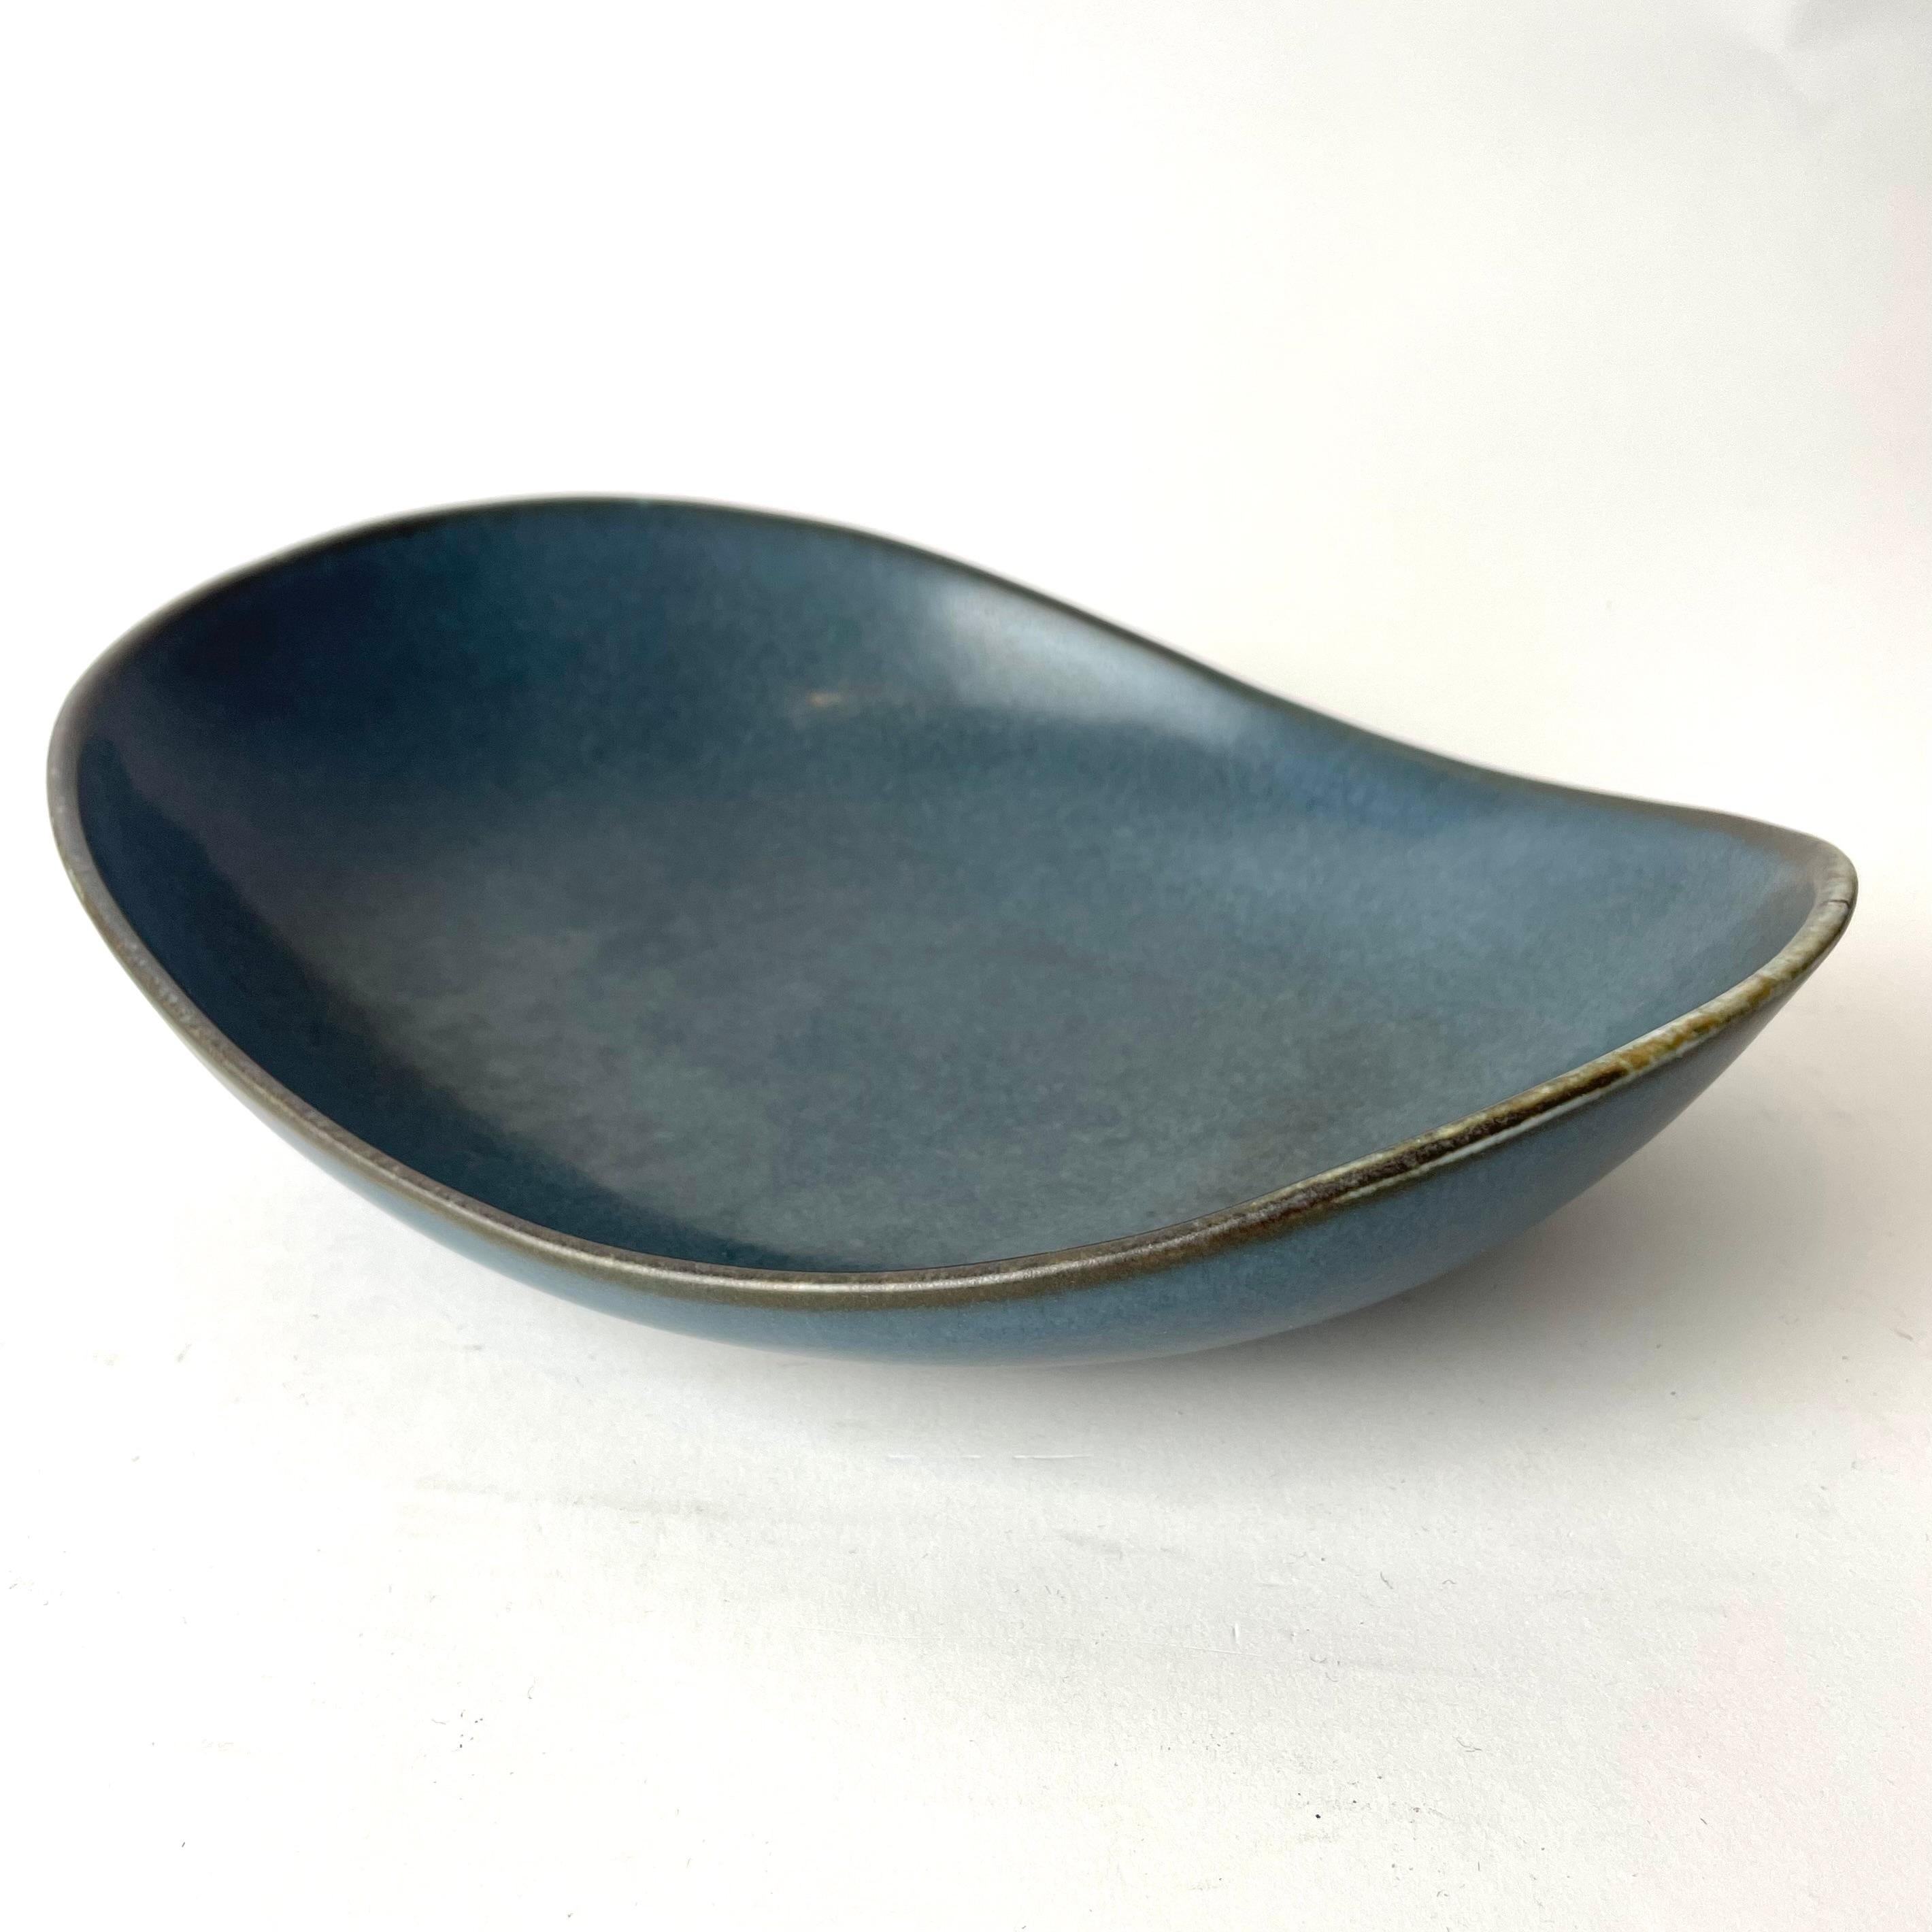 Swedish Scandinavian Decorative Dish Bowl designed by prominent Swedish designer Carl-Harry Stålhane for the Rörstrand company in Sweden.

This decorative bowl features a blue mettled appearance, complemented by edges in tones of green and brown.